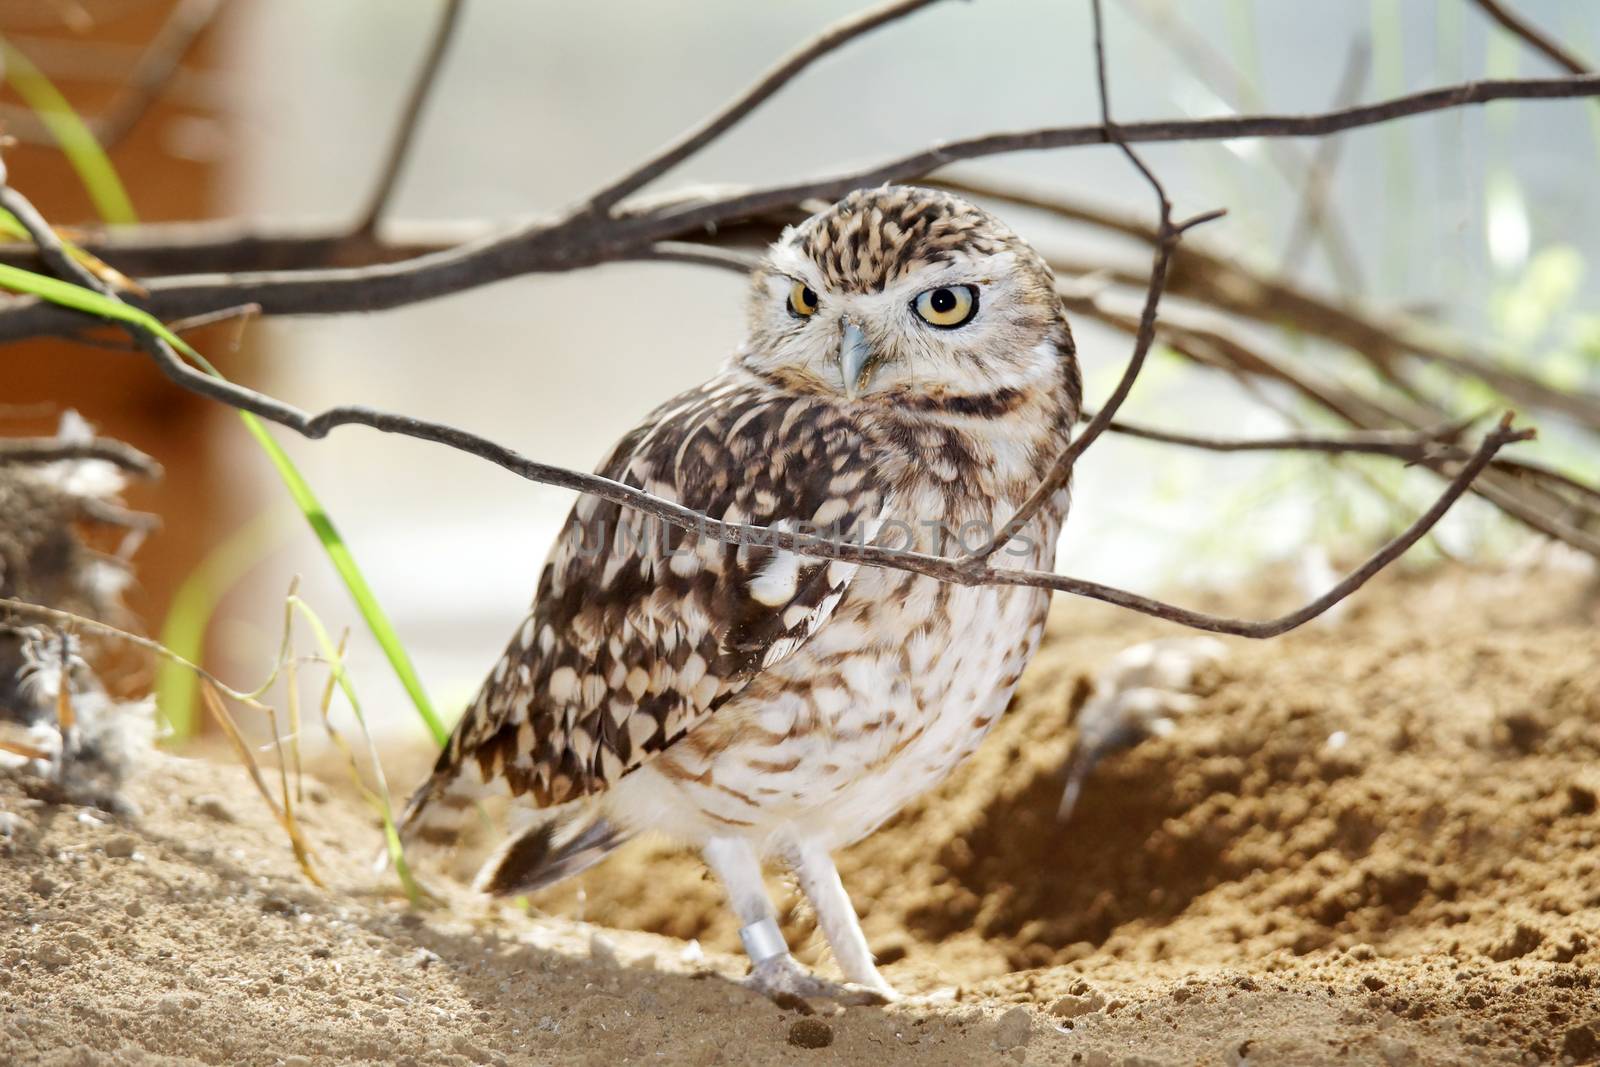 Burrowing owl by Mirage3